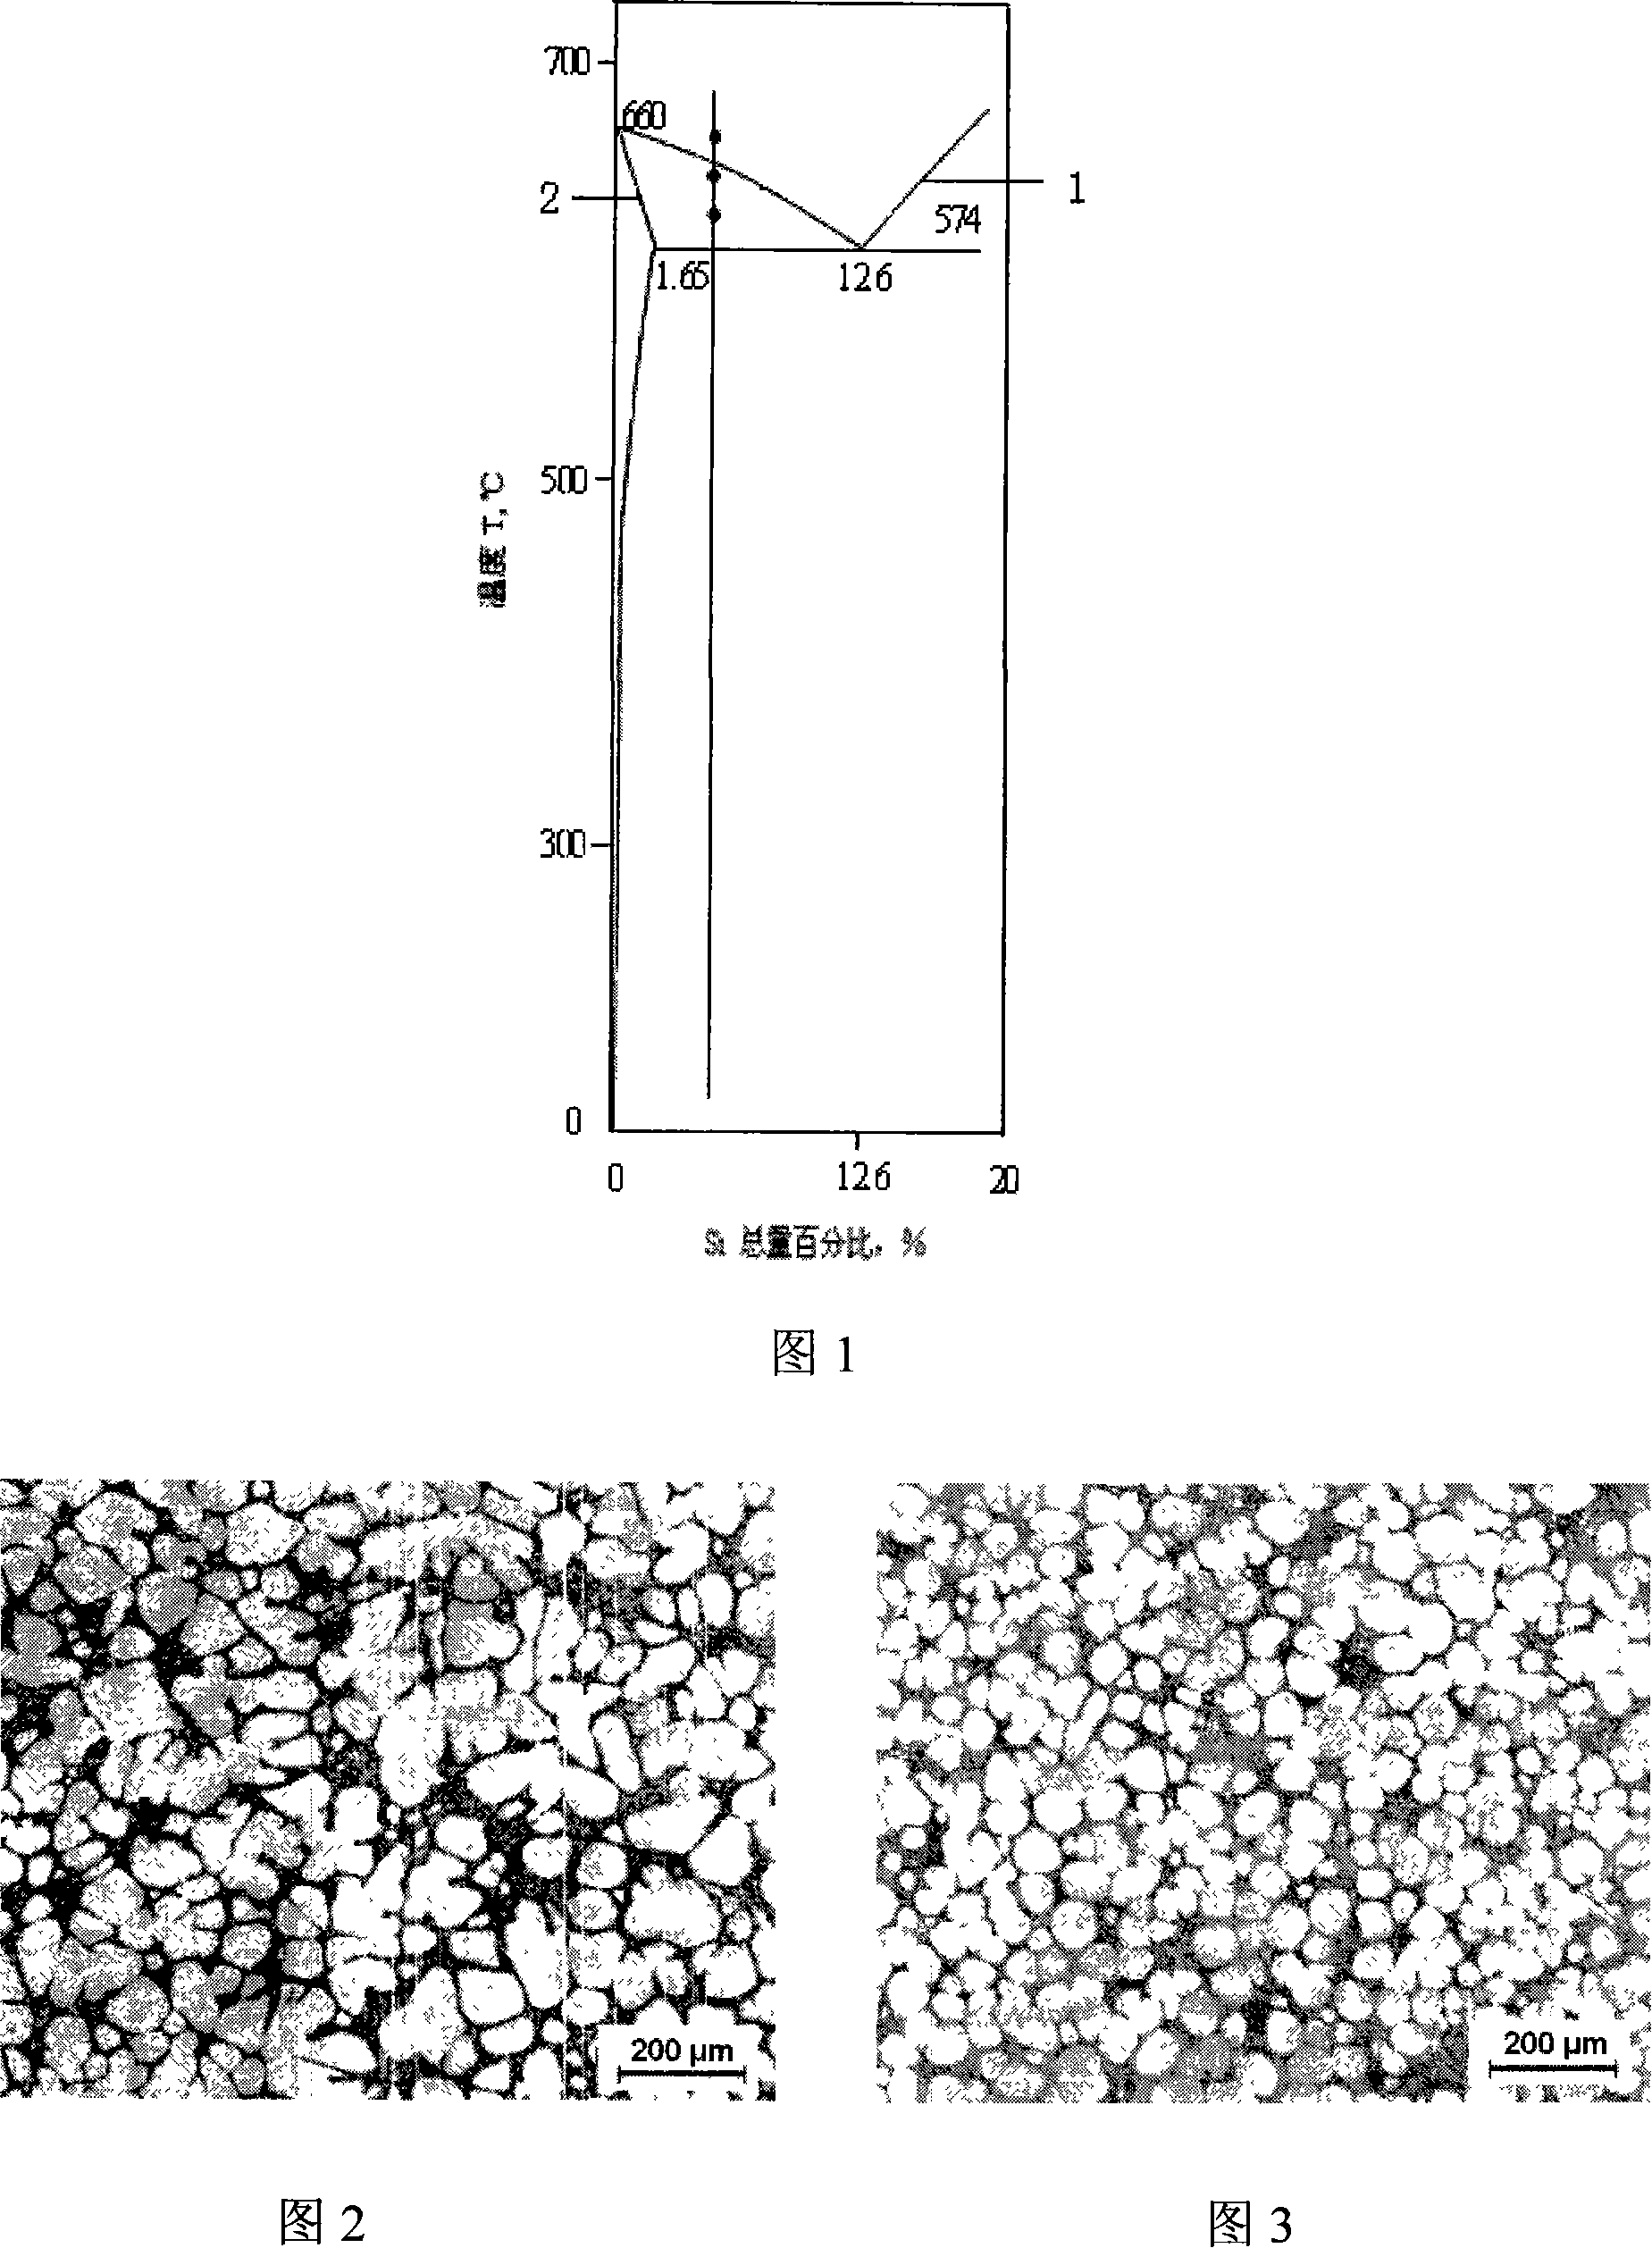 Method for preparing globular crystal aluminium alloy semi-solid slurry material by low rotary speed transport pipe